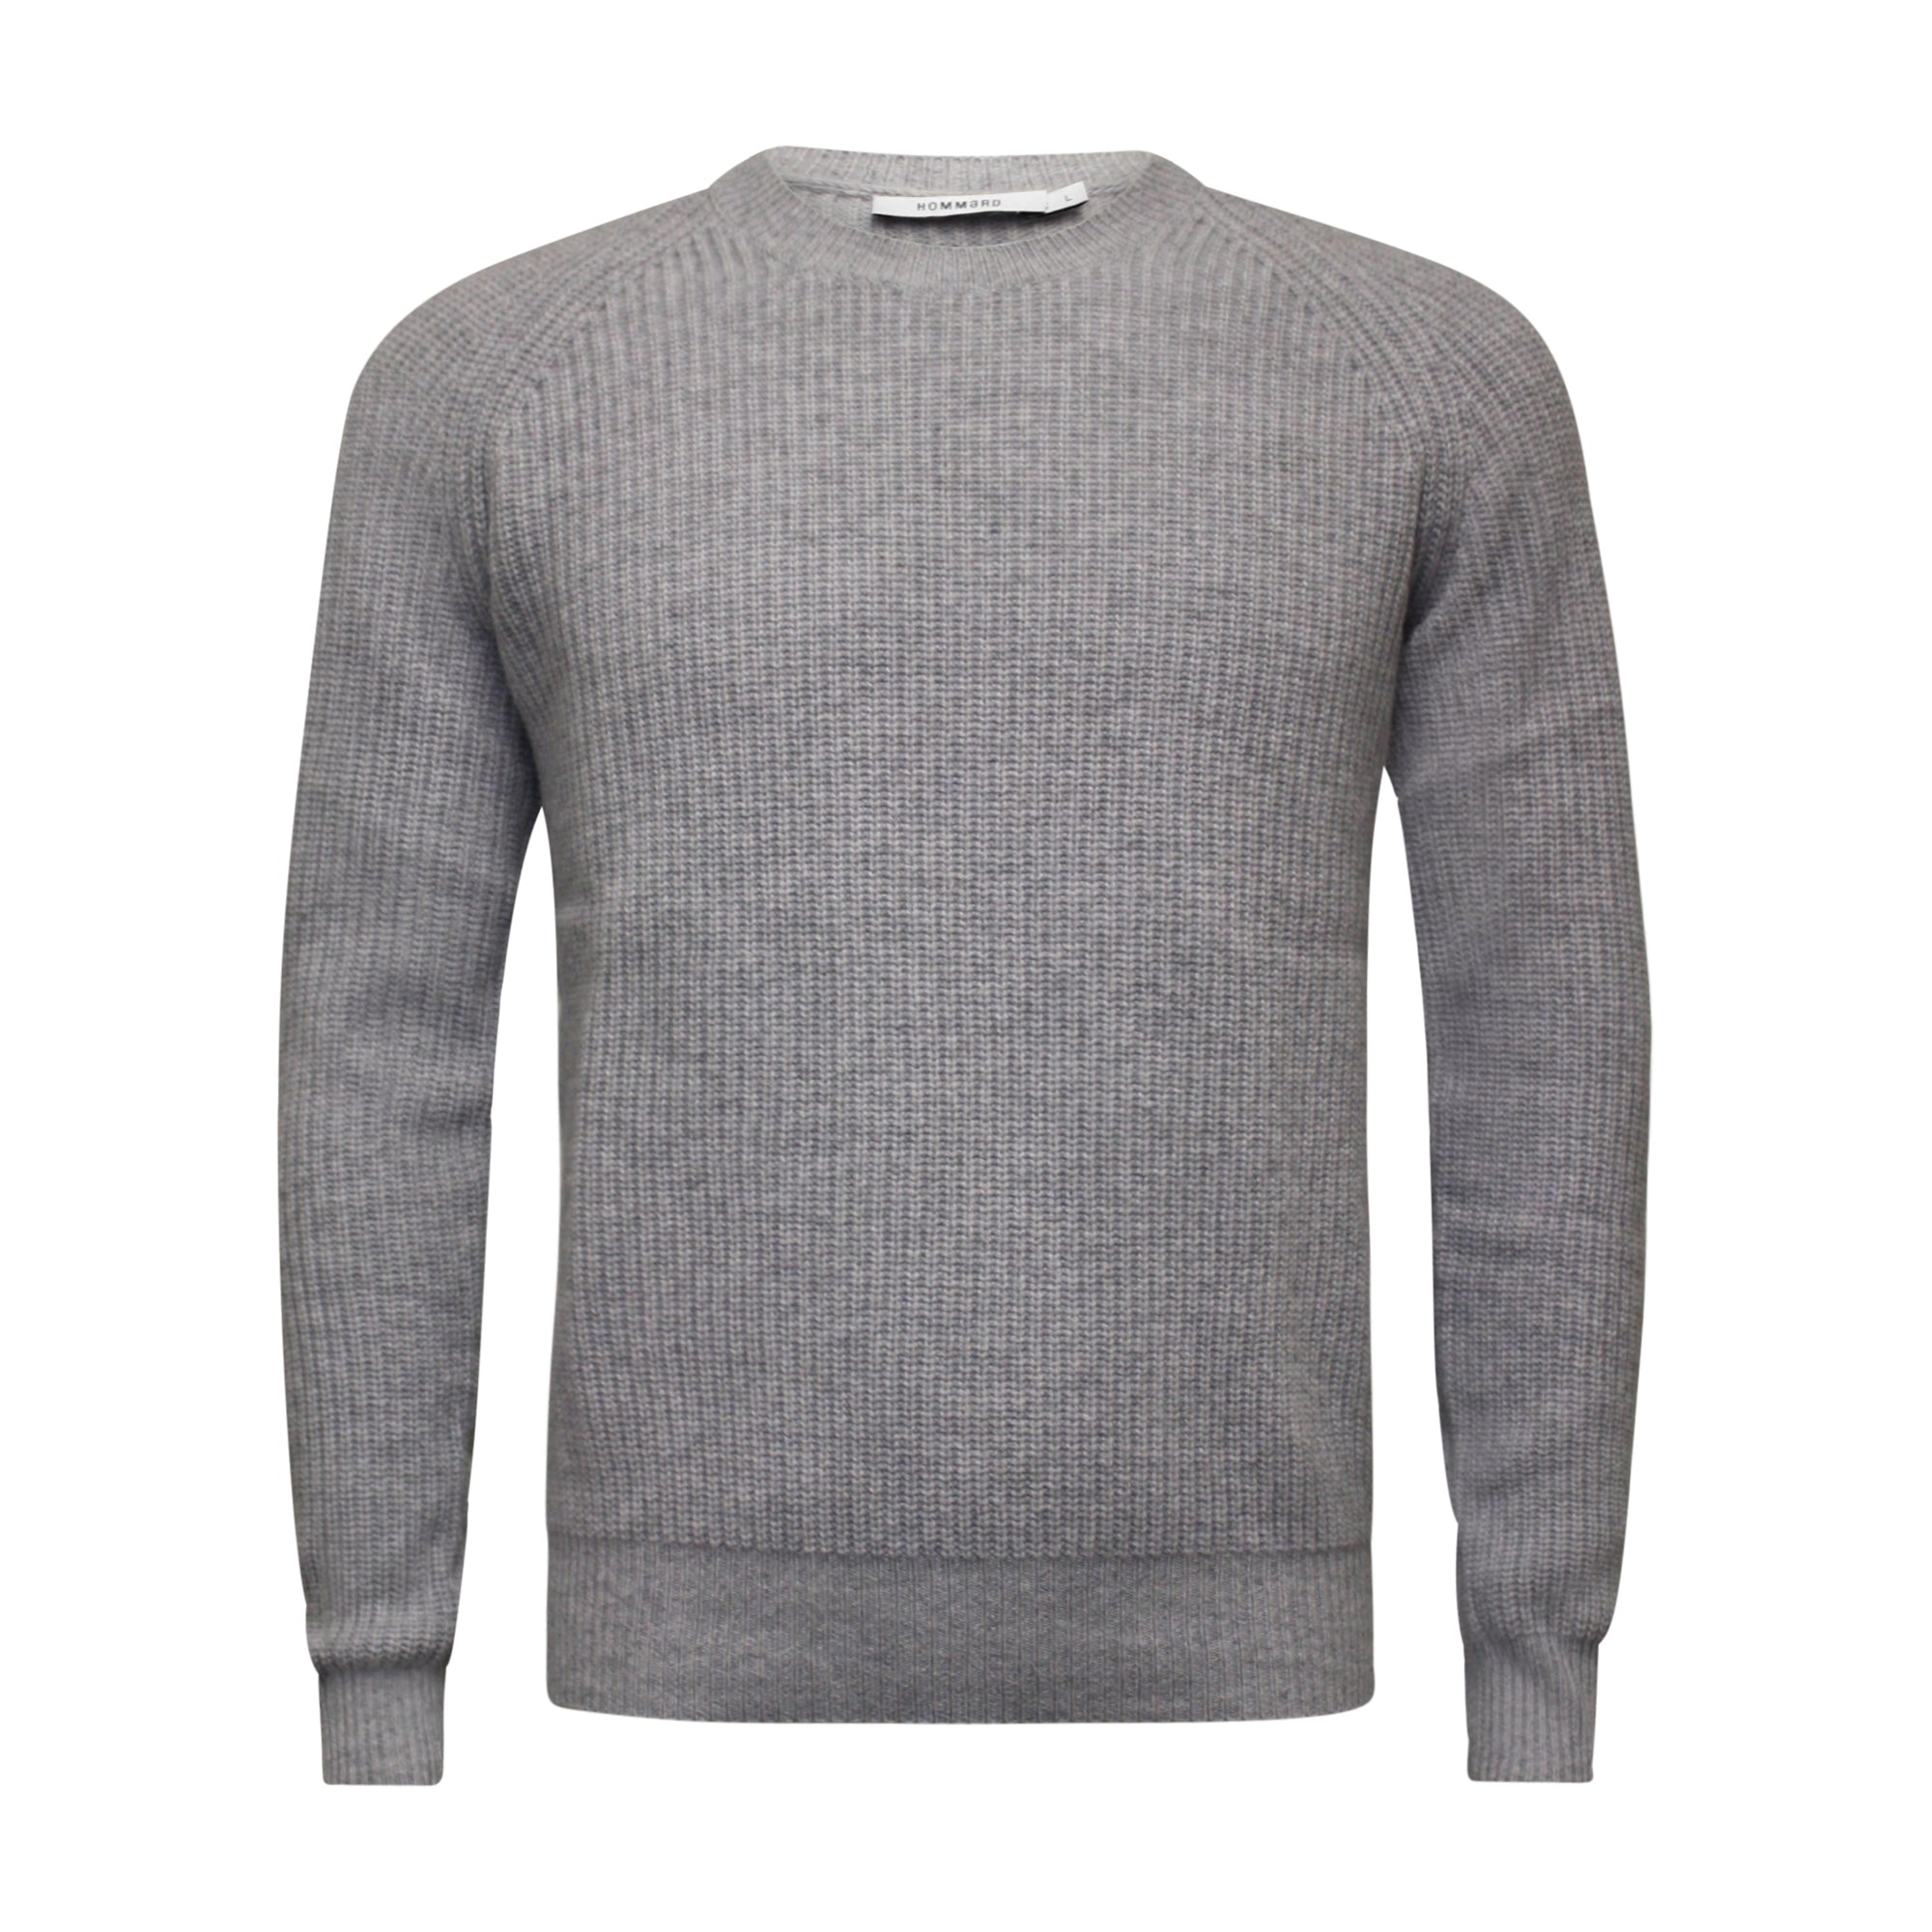 Thick cashmere sweater in english rib in Petrol